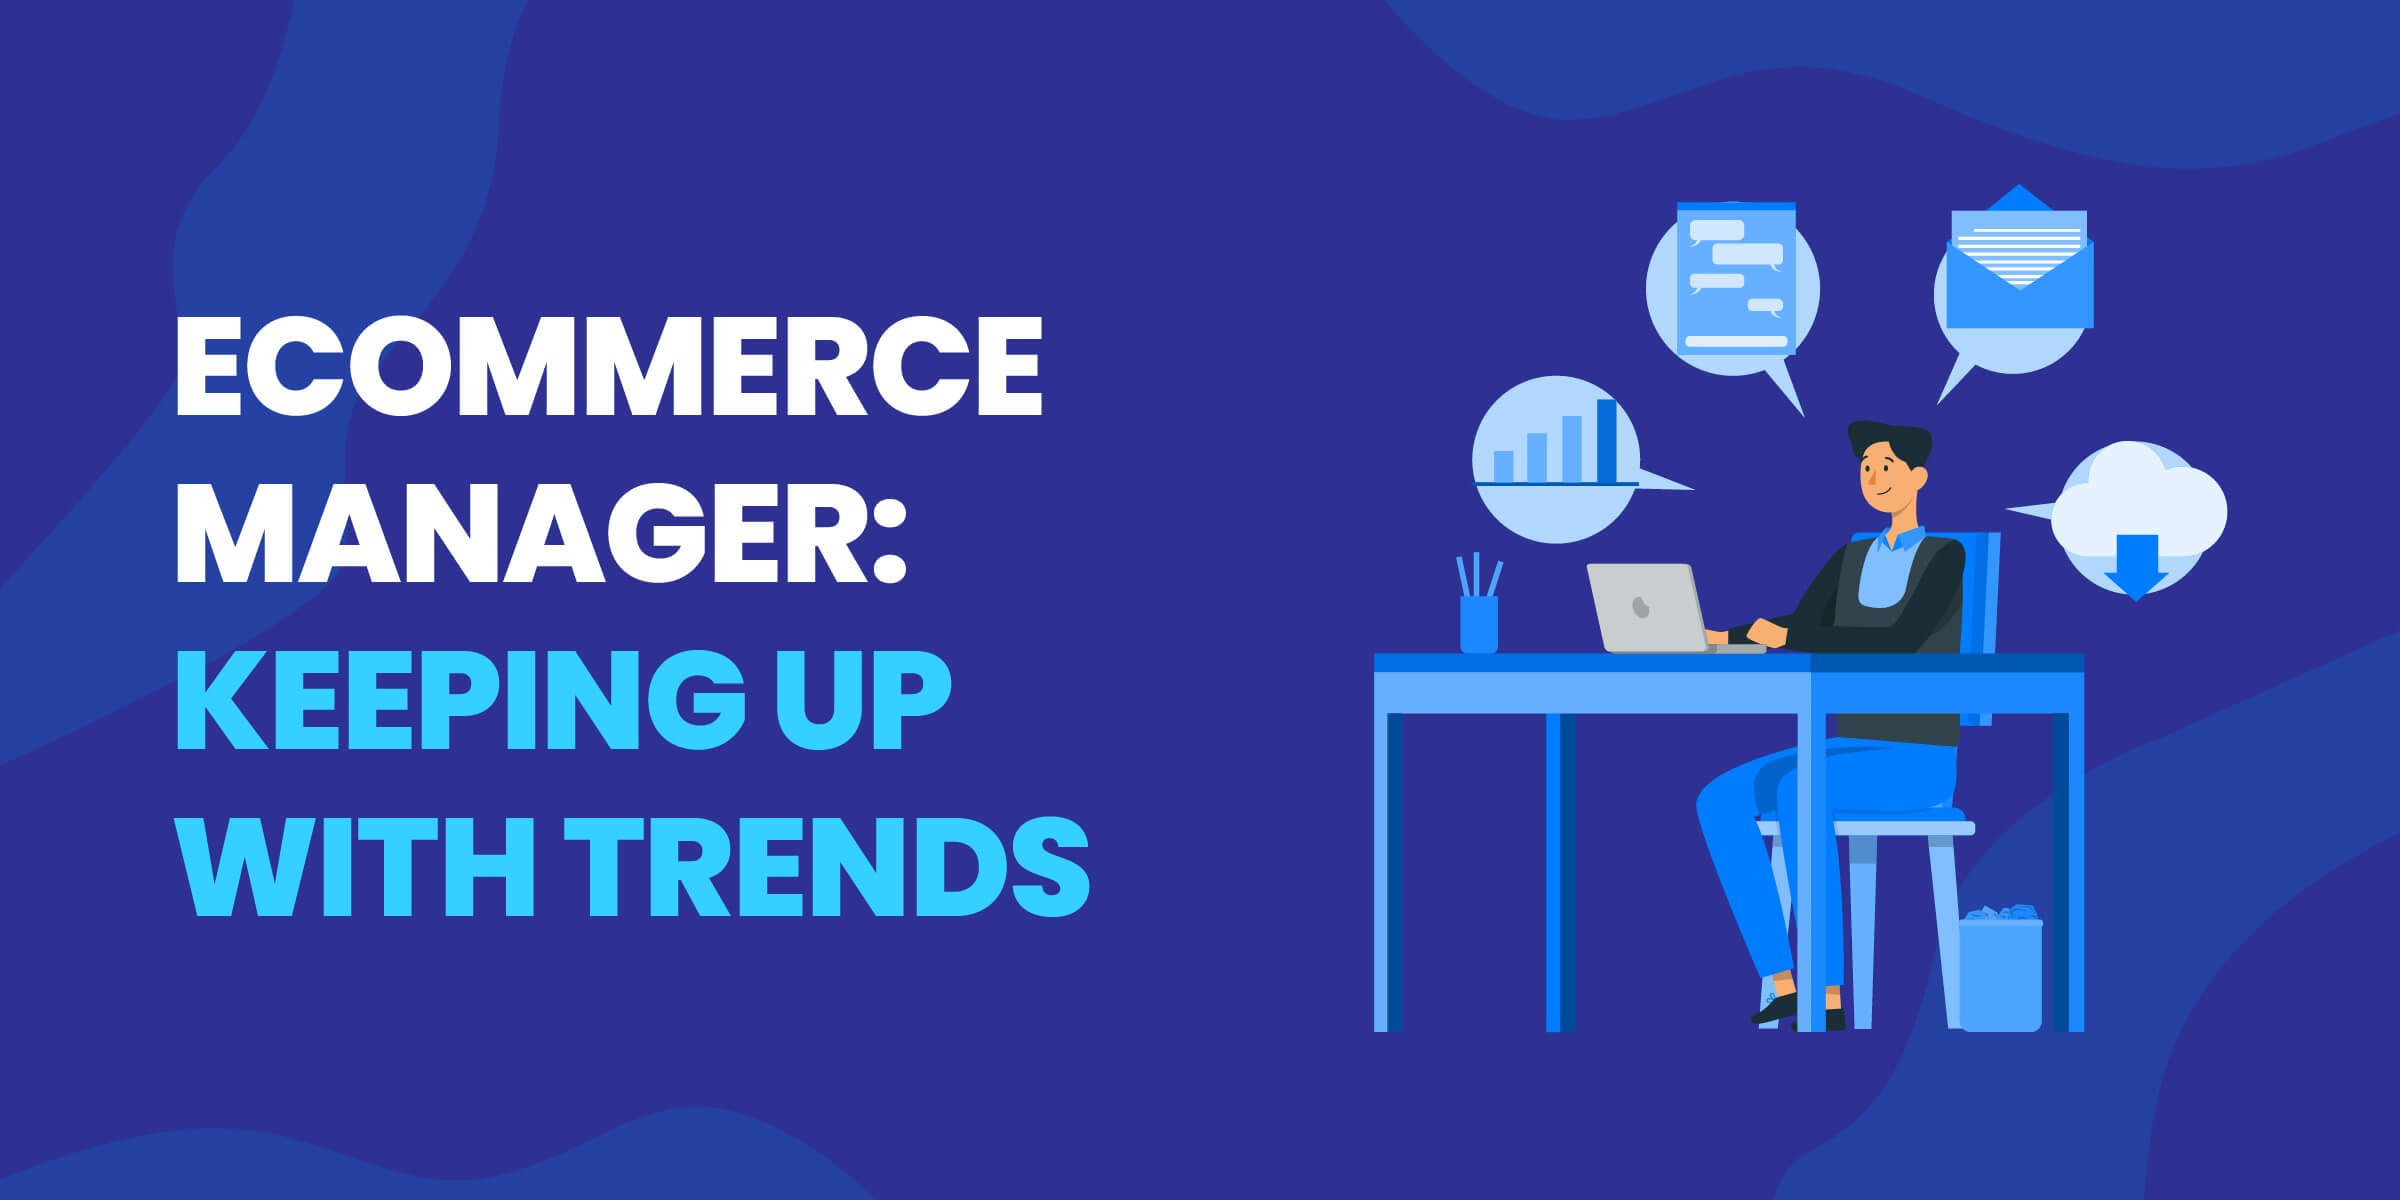 eCommerce Manager Keeping Up With Trends